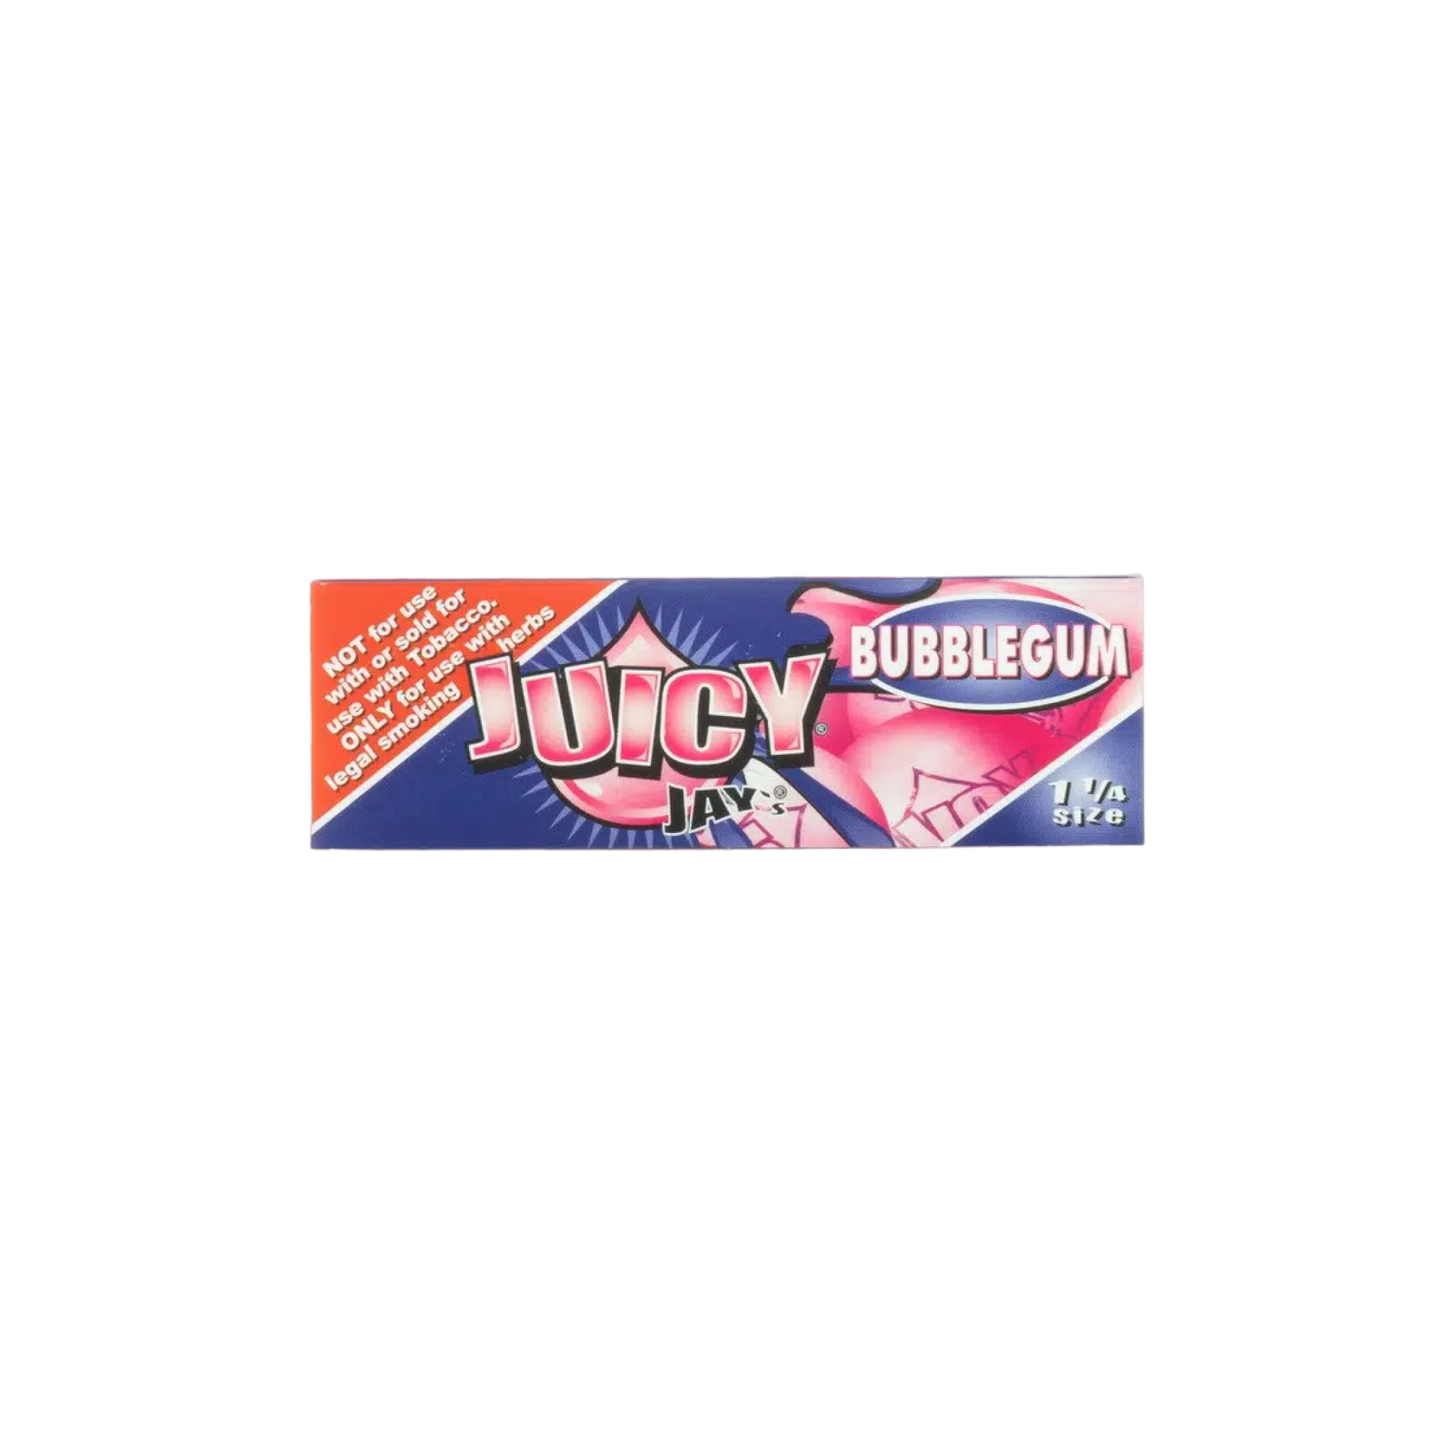 Juicy Jay’s Rolling Papers – Bubble Gum – 1 1/4